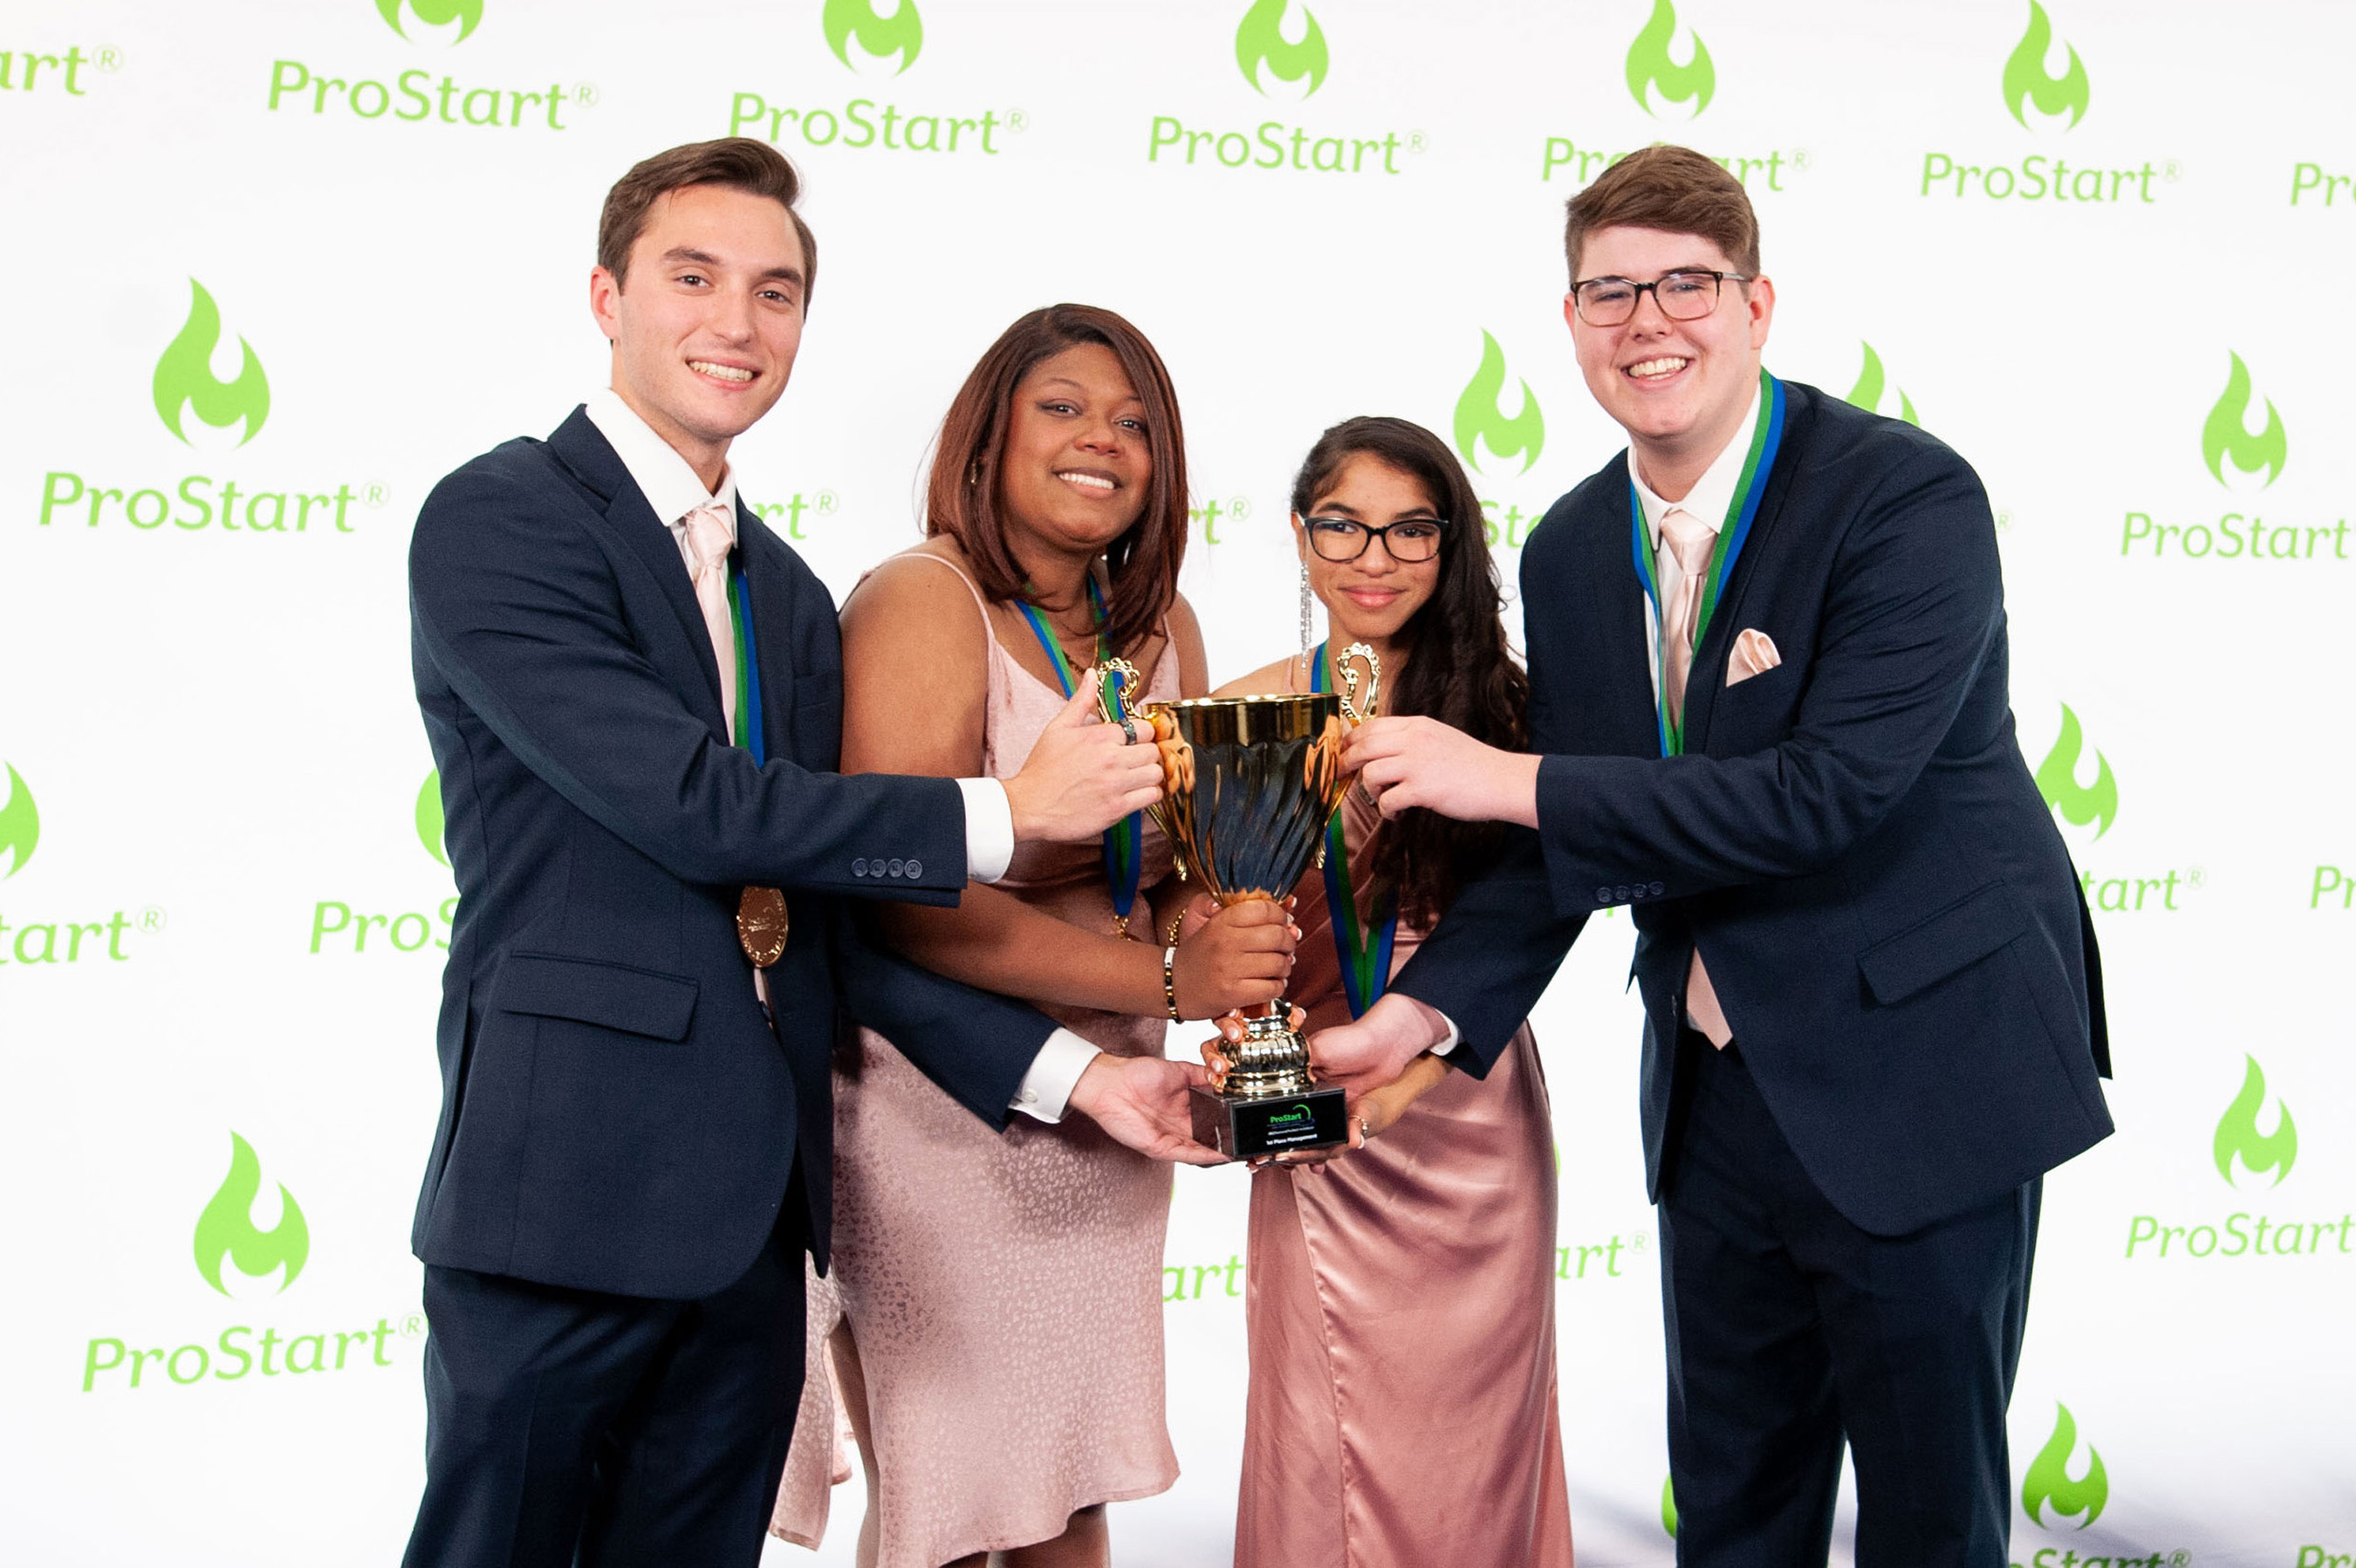 Ben Barber Innovation Academy in Mansfield, Texas, won first place in the restaurant management competition with “The Herb’N Table” concept that featured a farm-to-table, contemporary-casual dining experience.